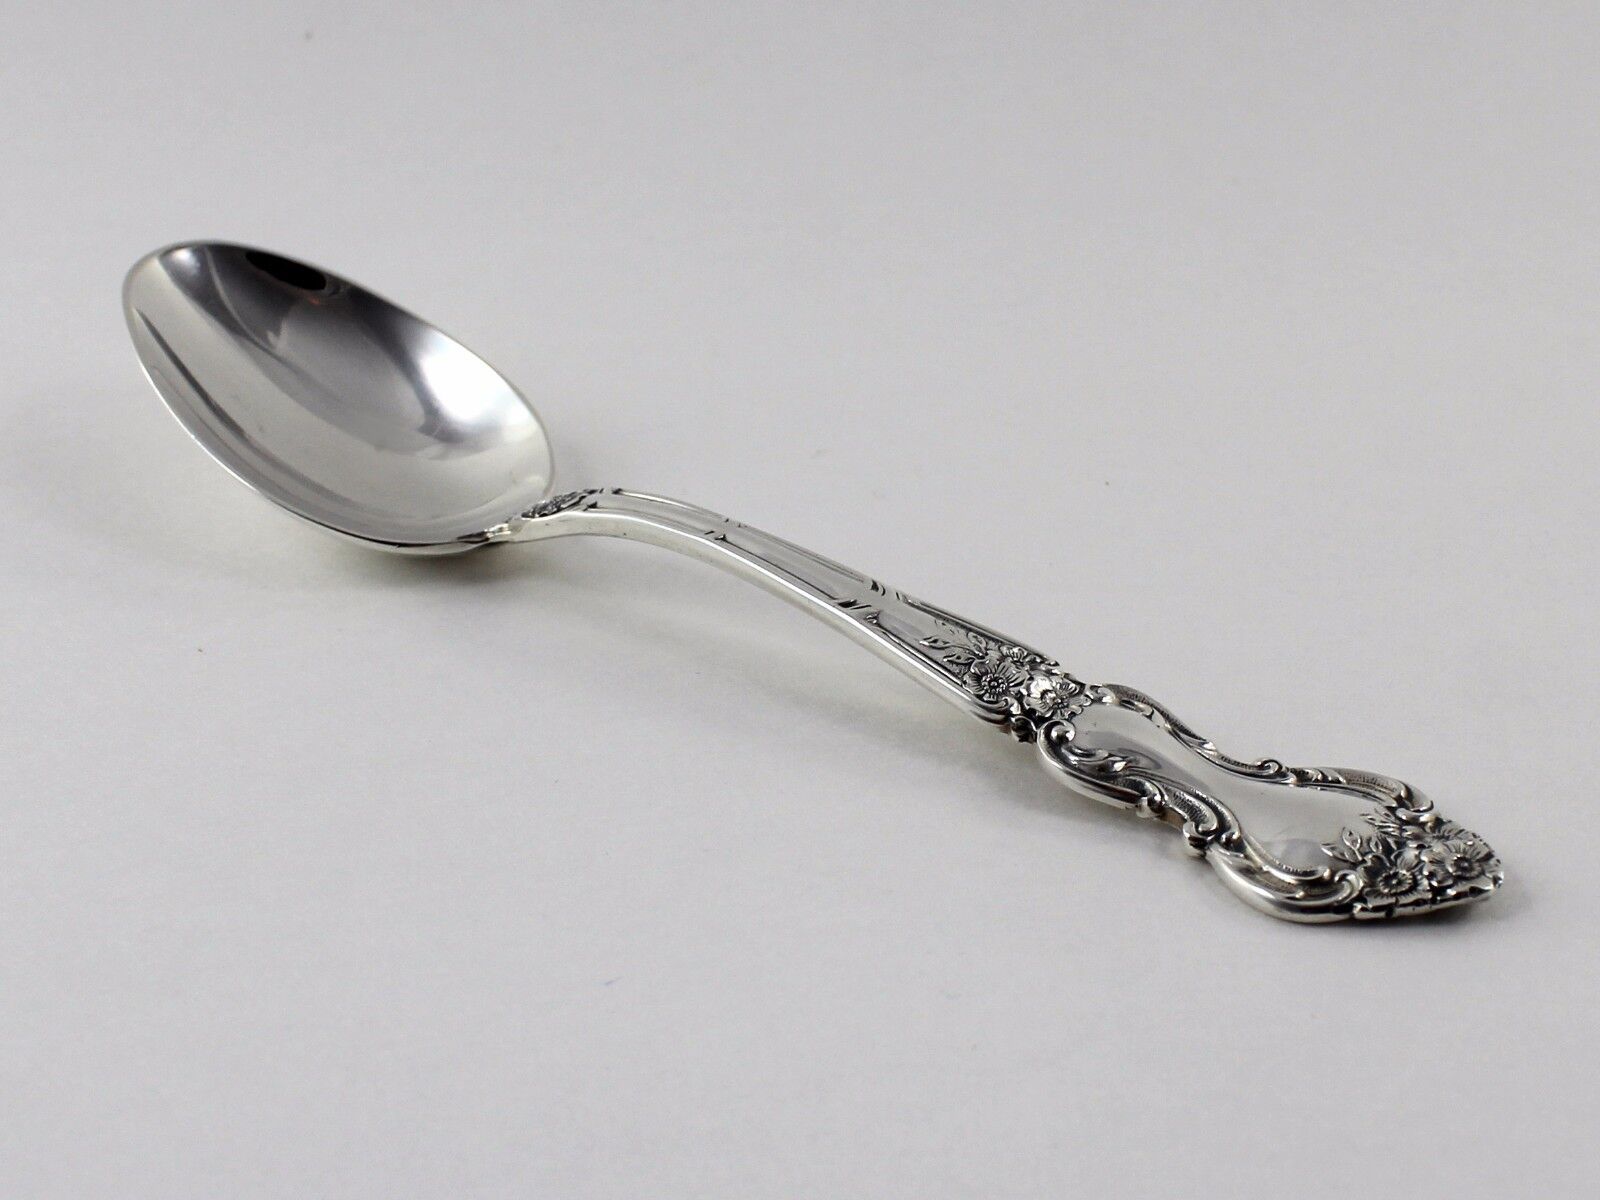 Wallace Meadow Rose Sterling Silver Teaspoon(s) - 5 7/8 Inches - No Monograms